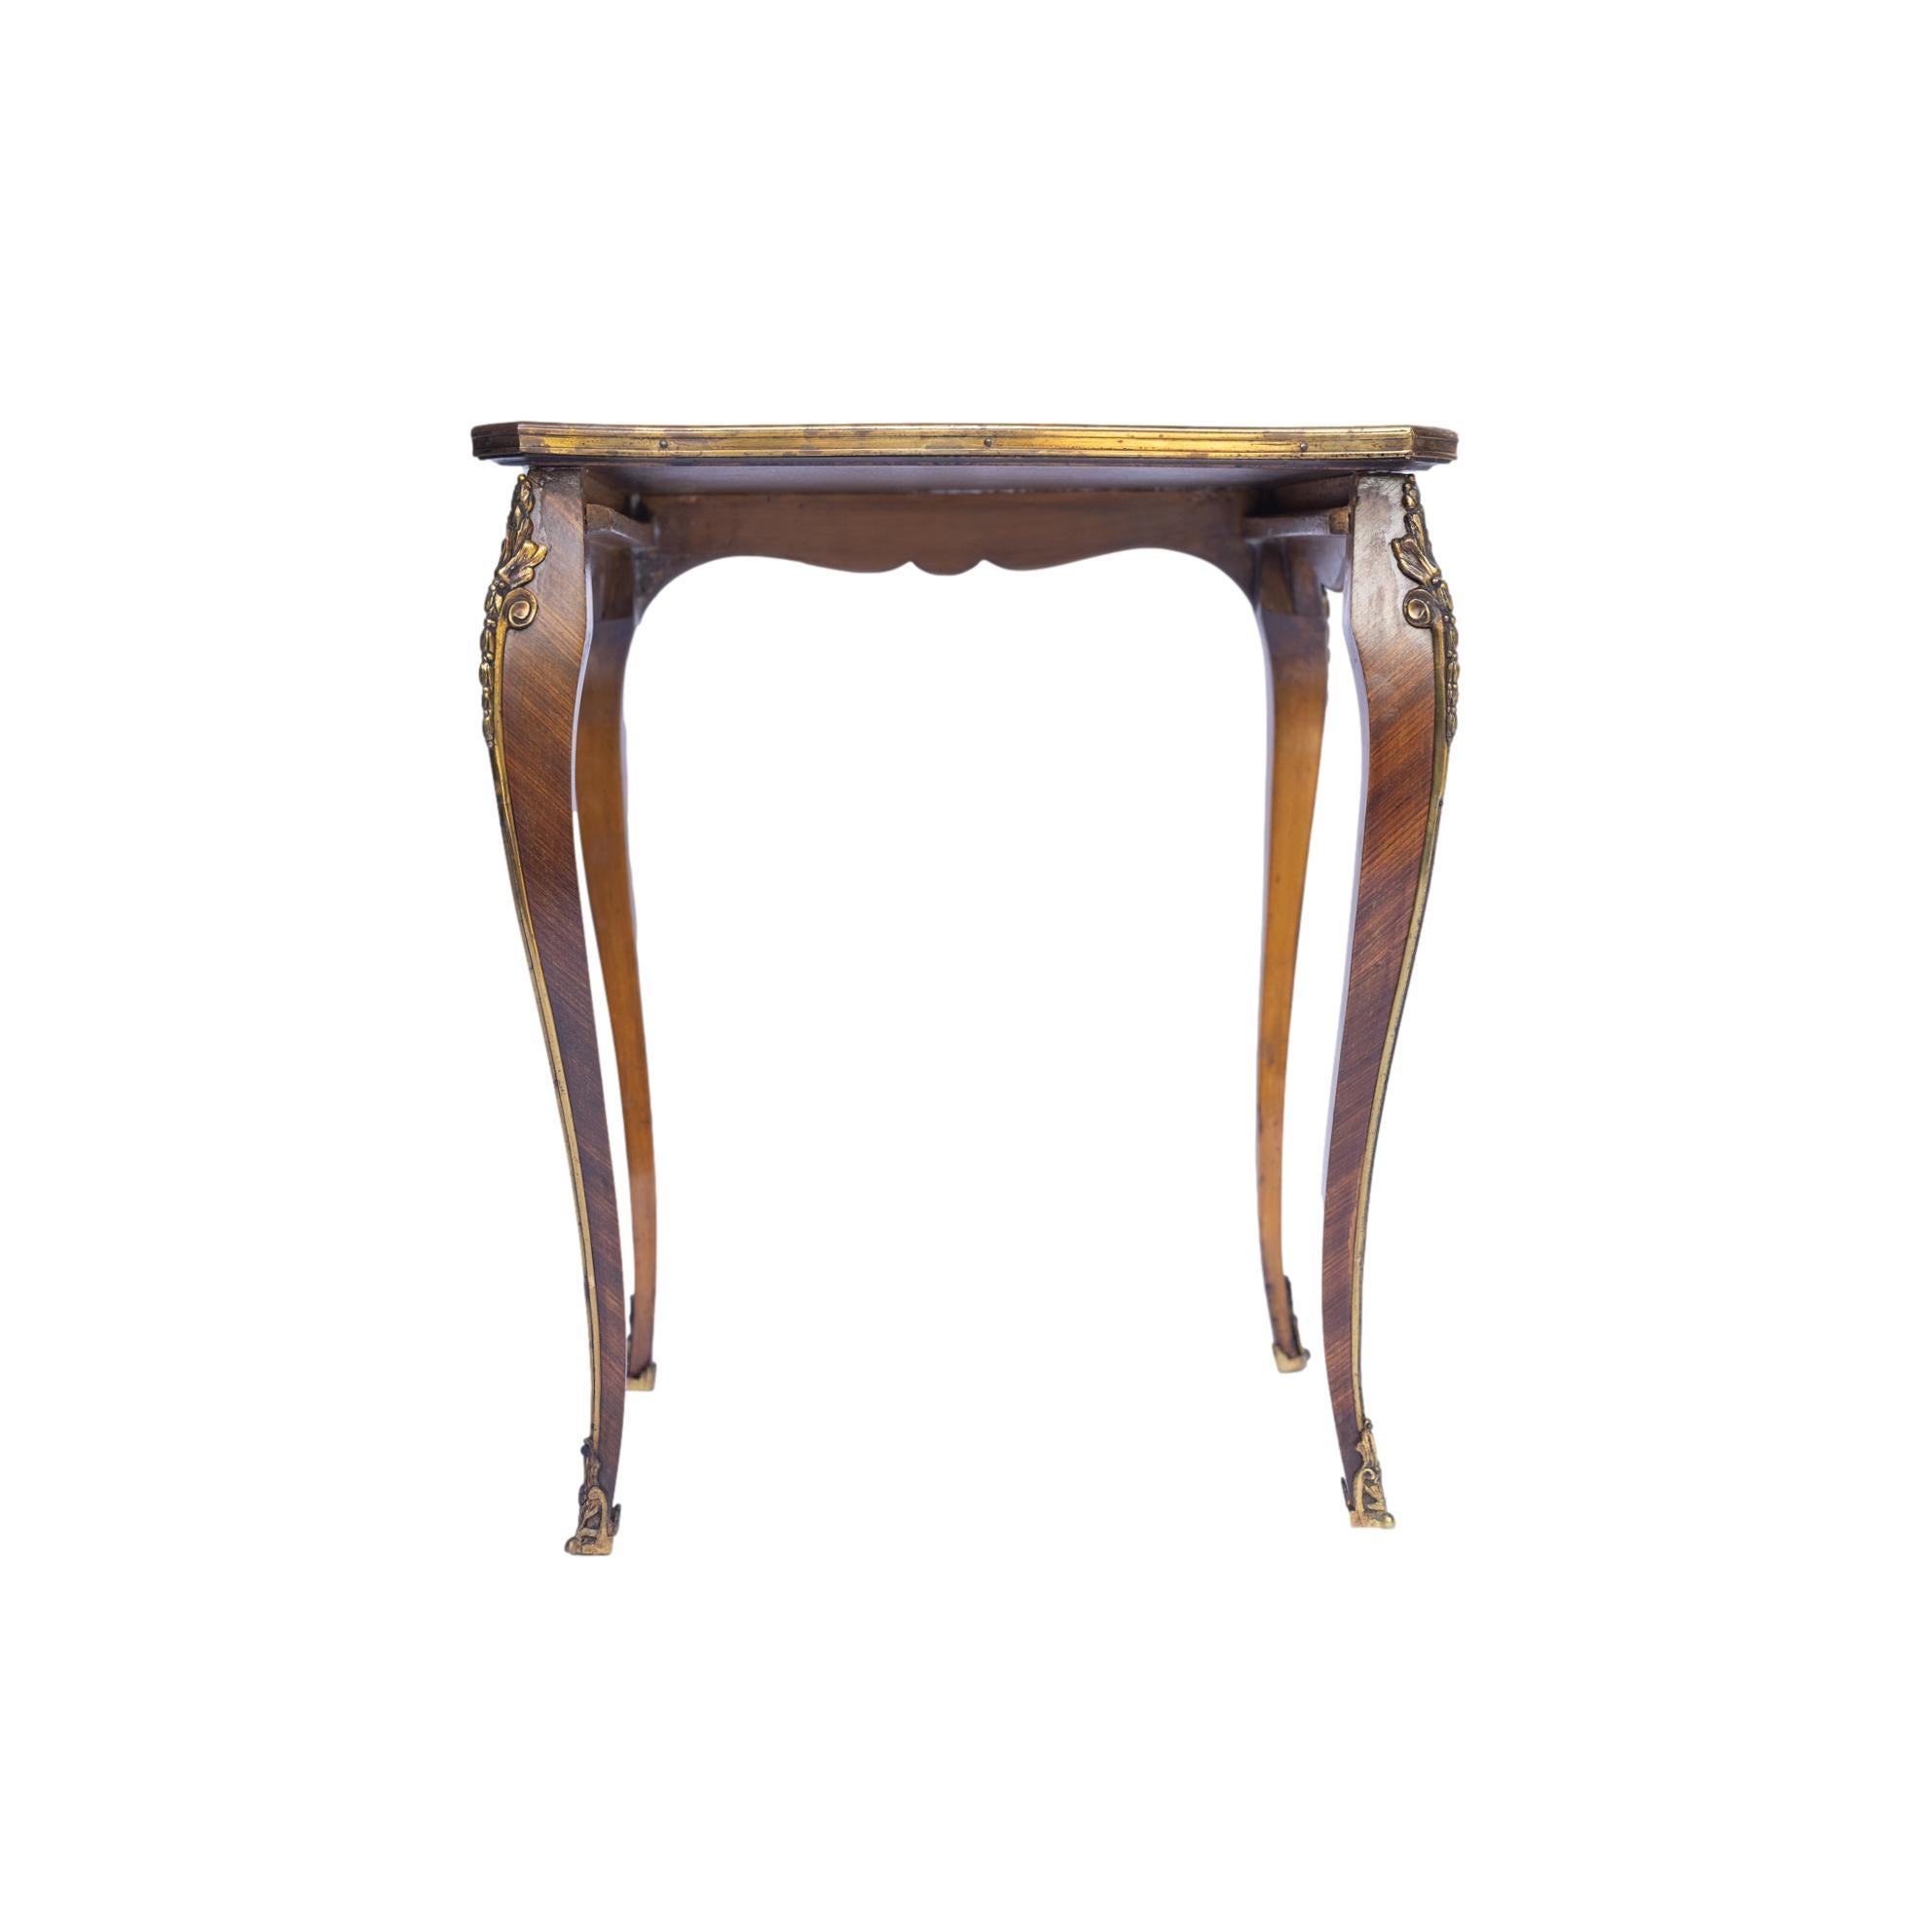 Set Three Louis XV-Style Kingwood and Parquetry Nesting Tables, French, c. 1880 For Sale 6